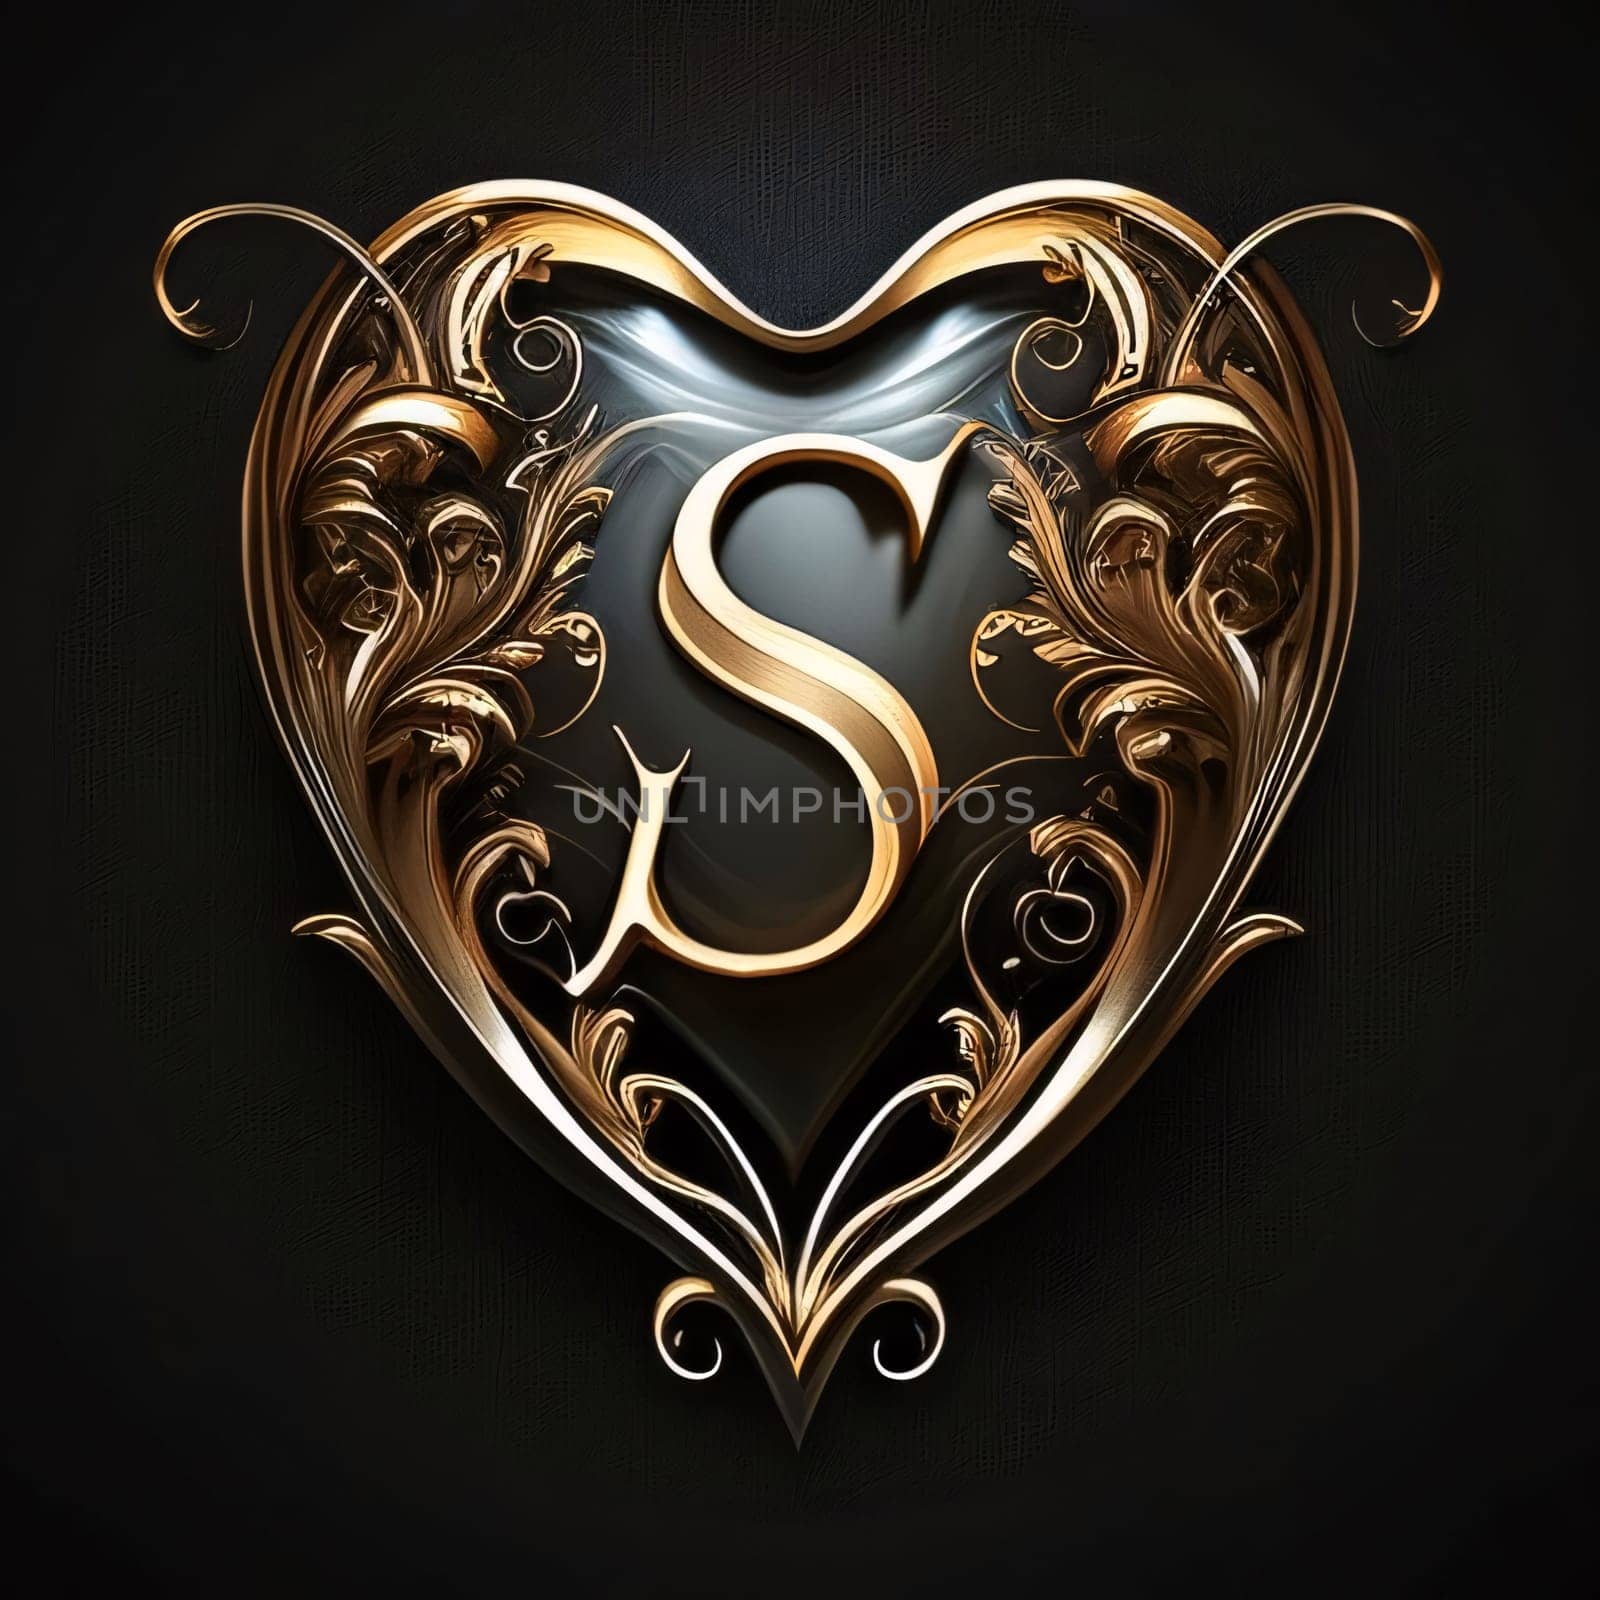 Graphic alphabet letters: Luxury golden letter S in the shape of a heart with ornament